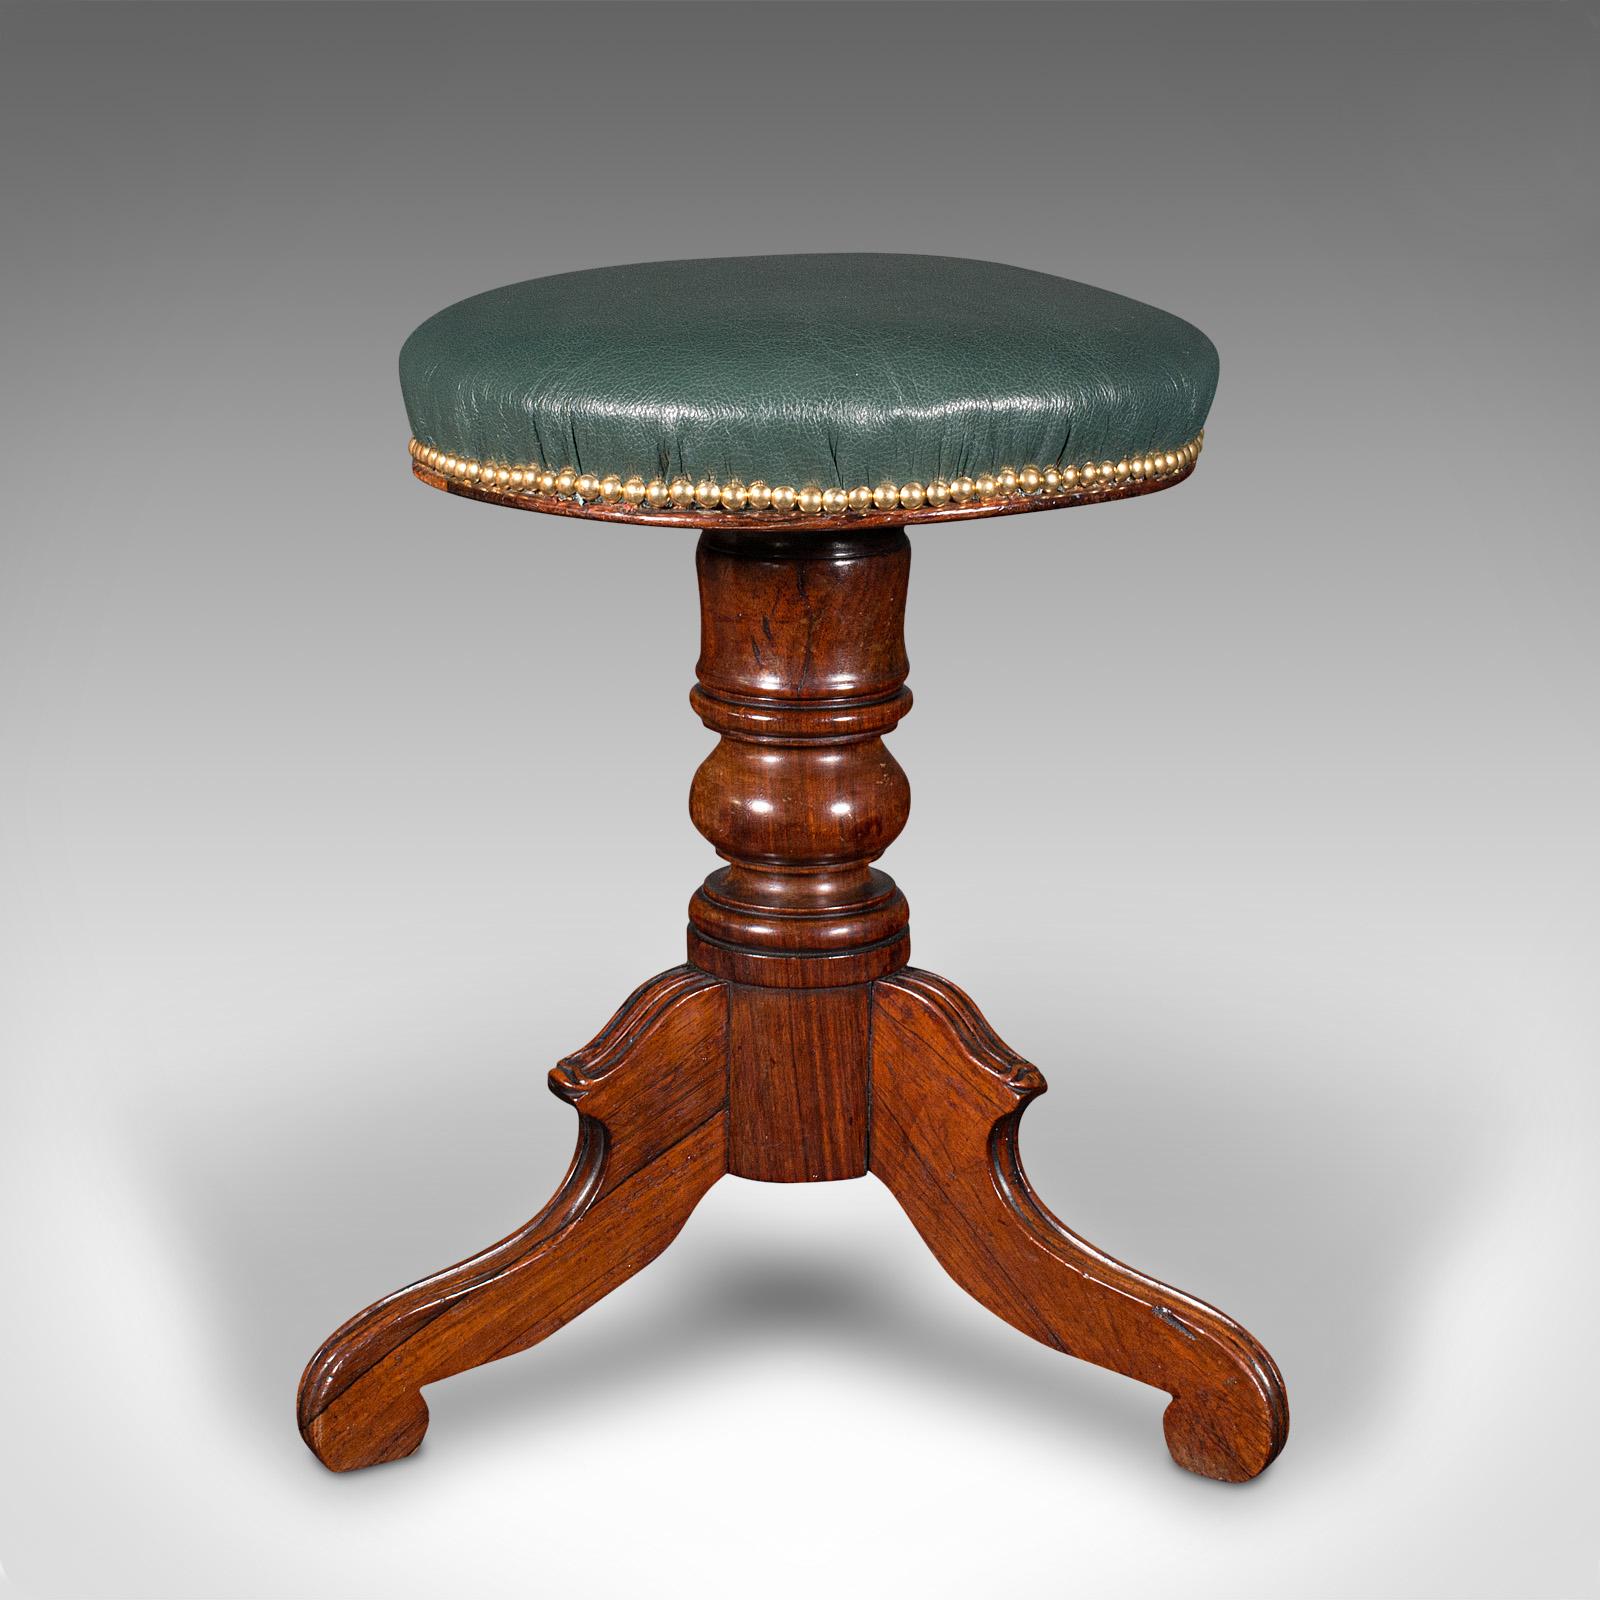 This is an antique piano stool. An English, rosewood and leather rising recital or dressing stool, dating to the early Victorian period, circa 1850.
 
Delightfully crafted stool with quality leather covering
Displays a desirable aged patina and